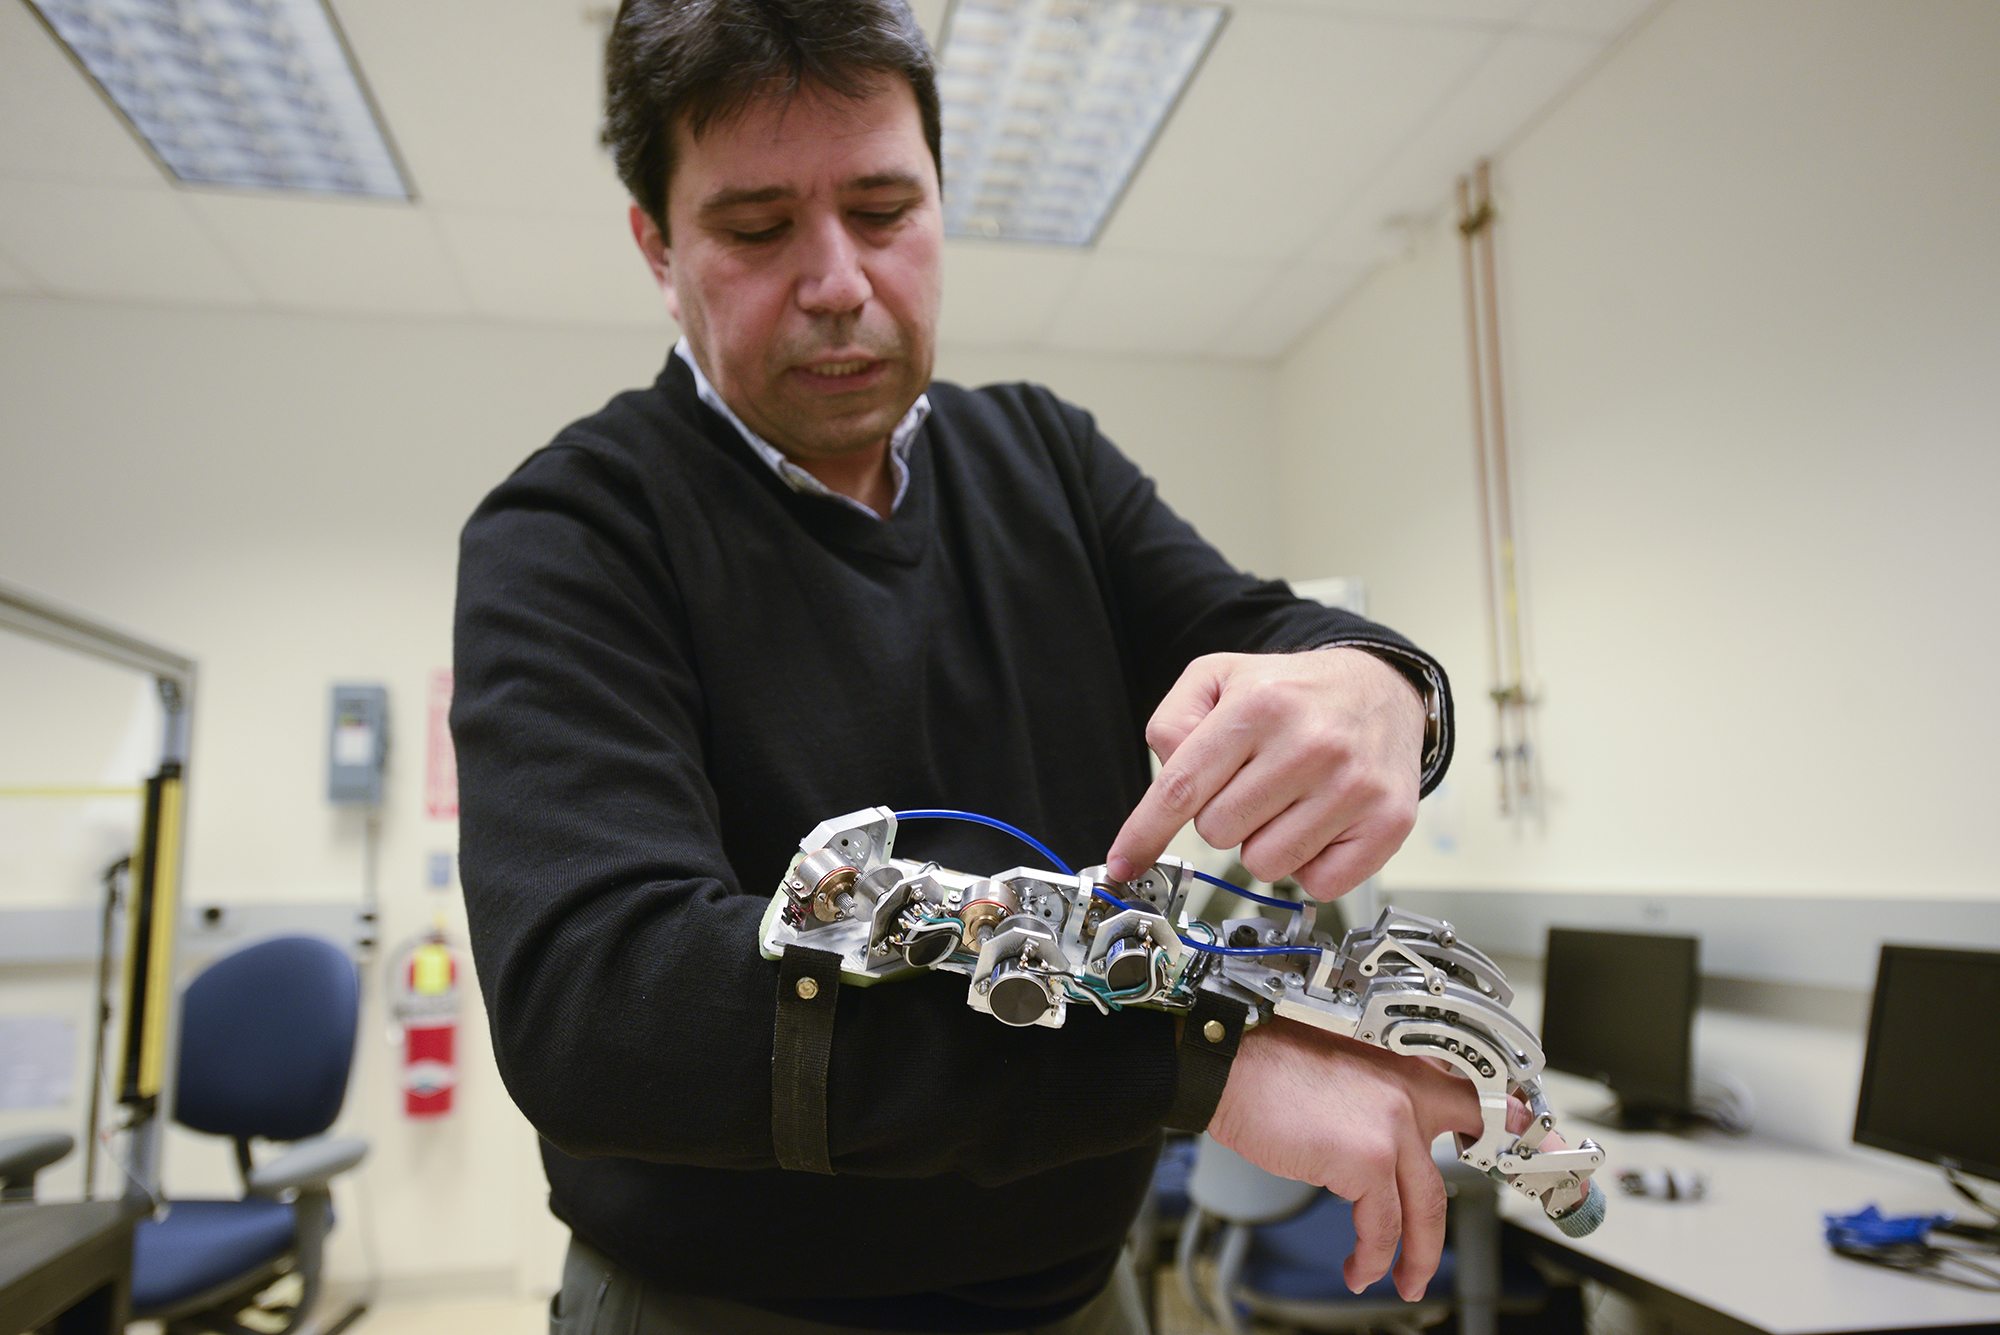 Hakan Gurocak, WSU Vancouver professor and director of the school of engineering and computer science, demonstrates technology he patented for the haptic glove on Jan. 7. The glove allows the user to experience a sense of touch in virtual reality settings.